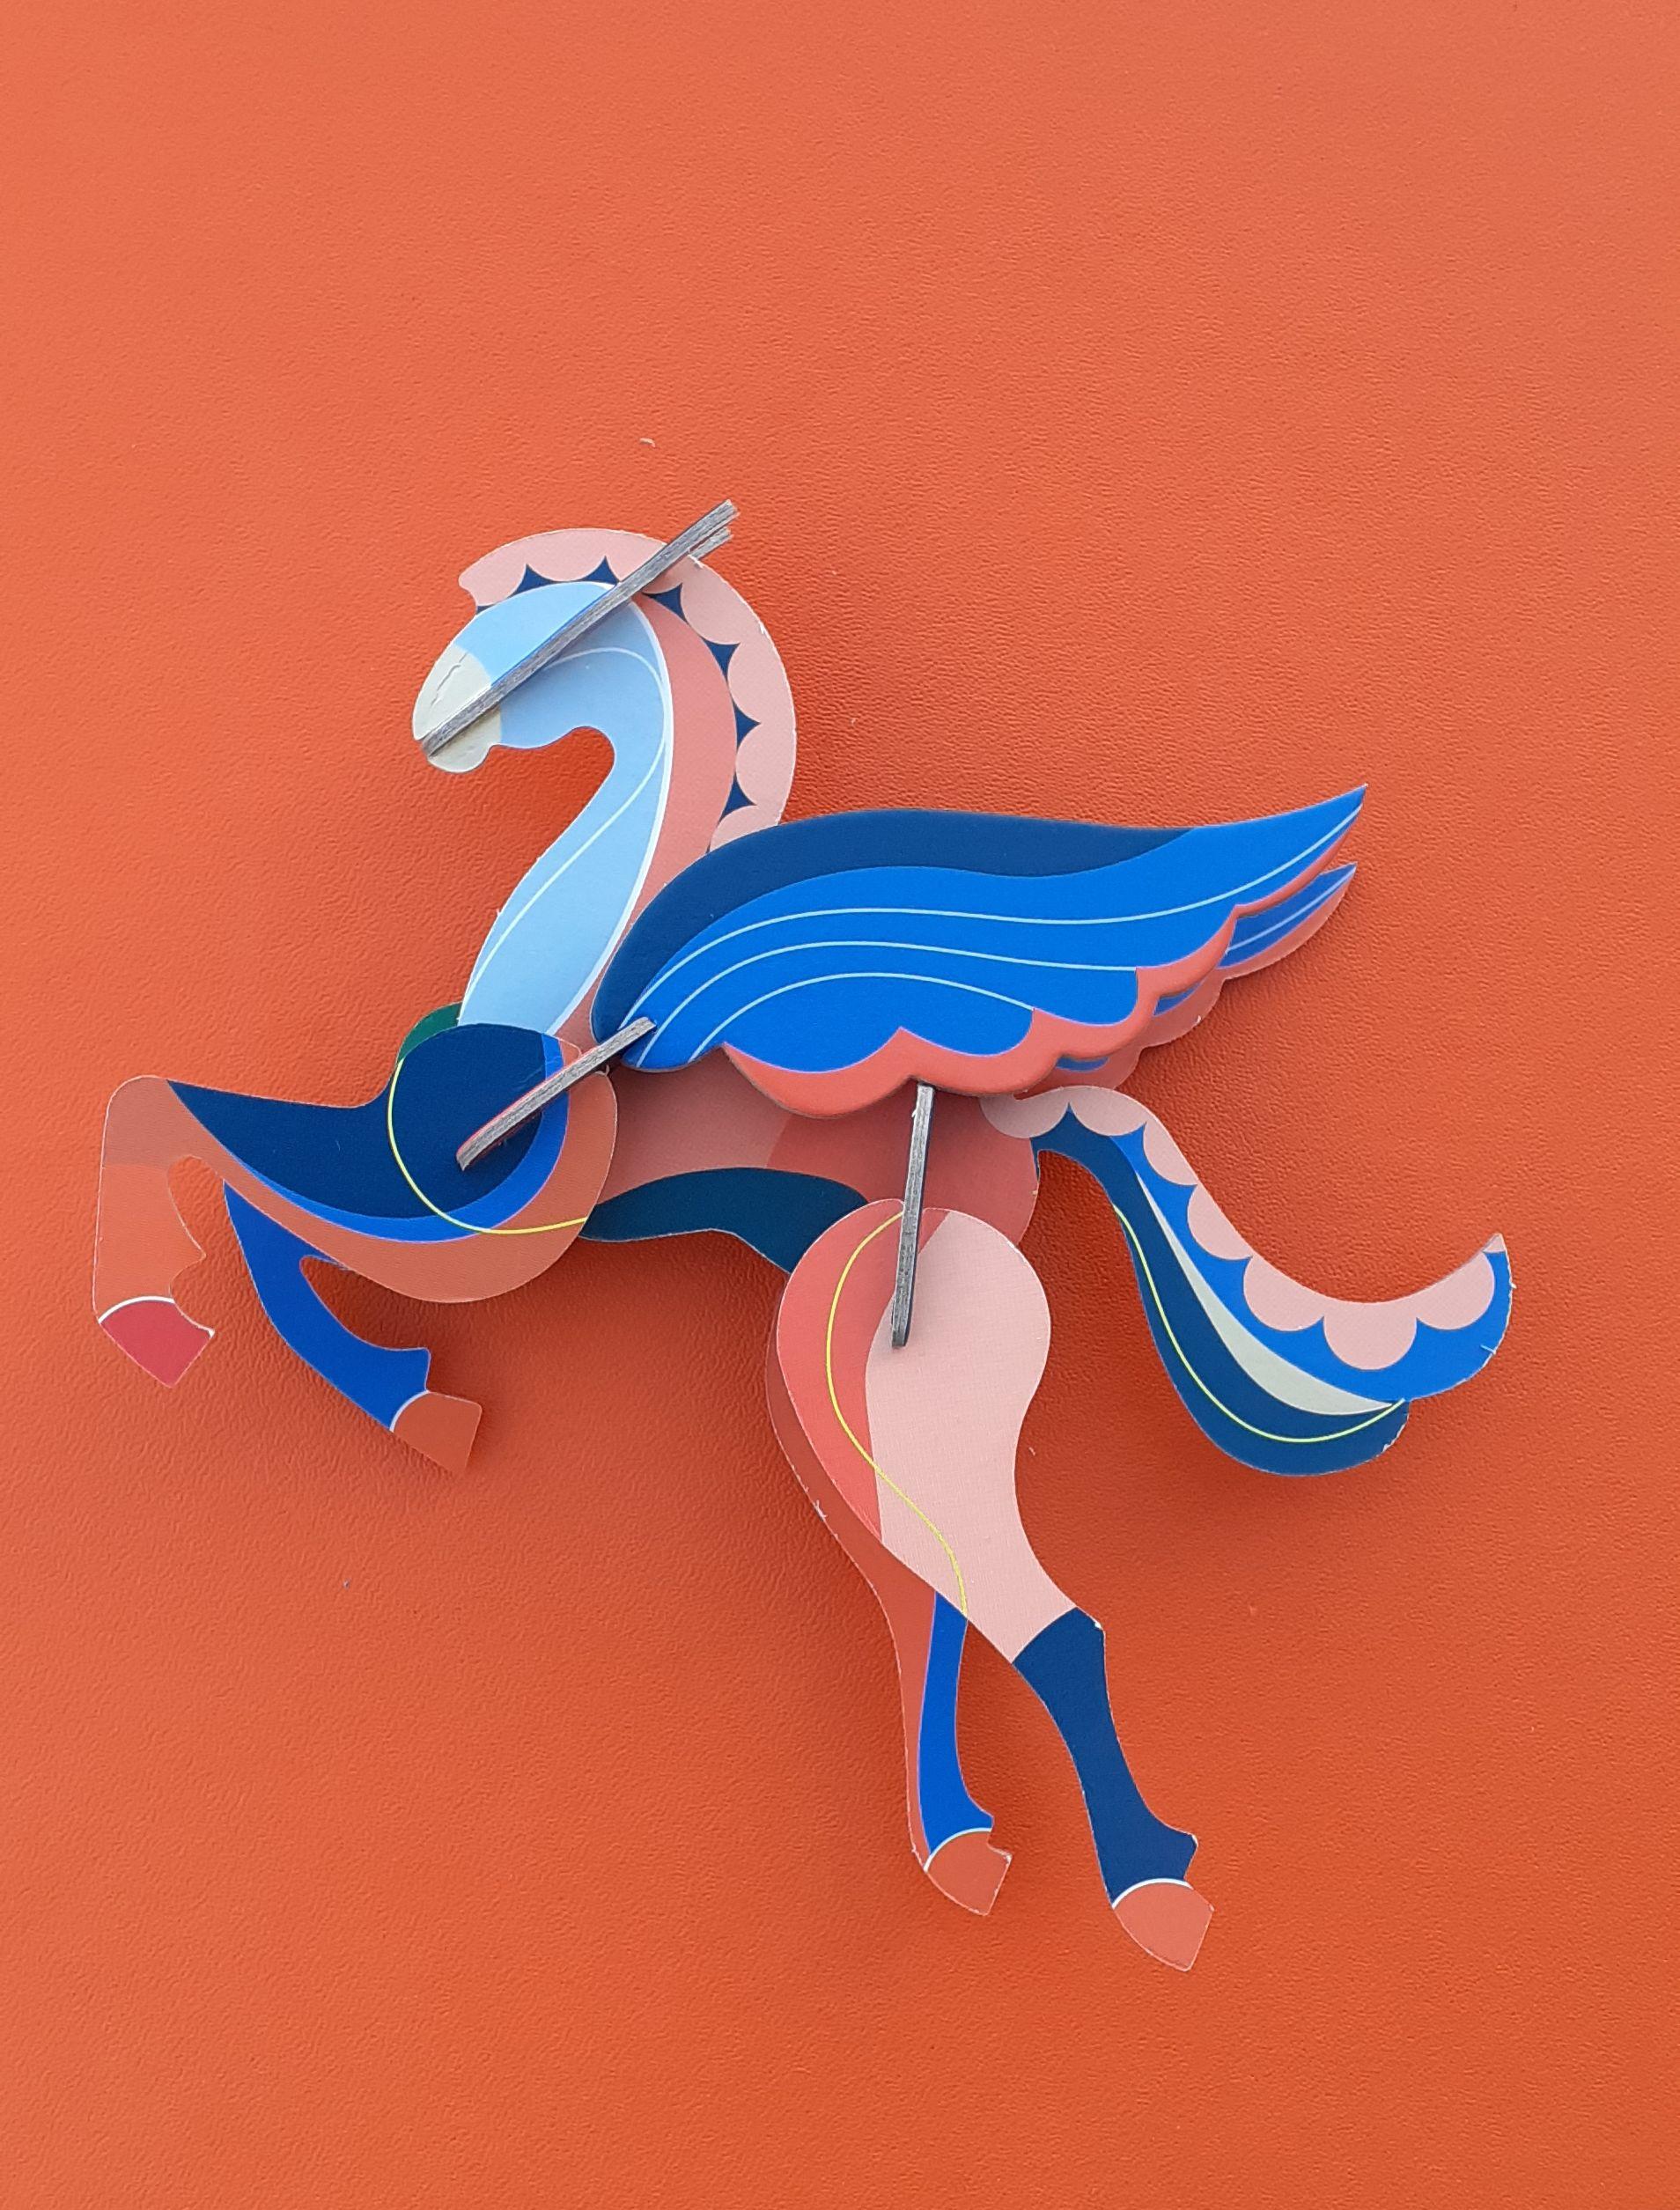 Hermès Pegasus Le Pégase Cheval Ailé Winged Horse in Cardboard to Hang For Sale 7